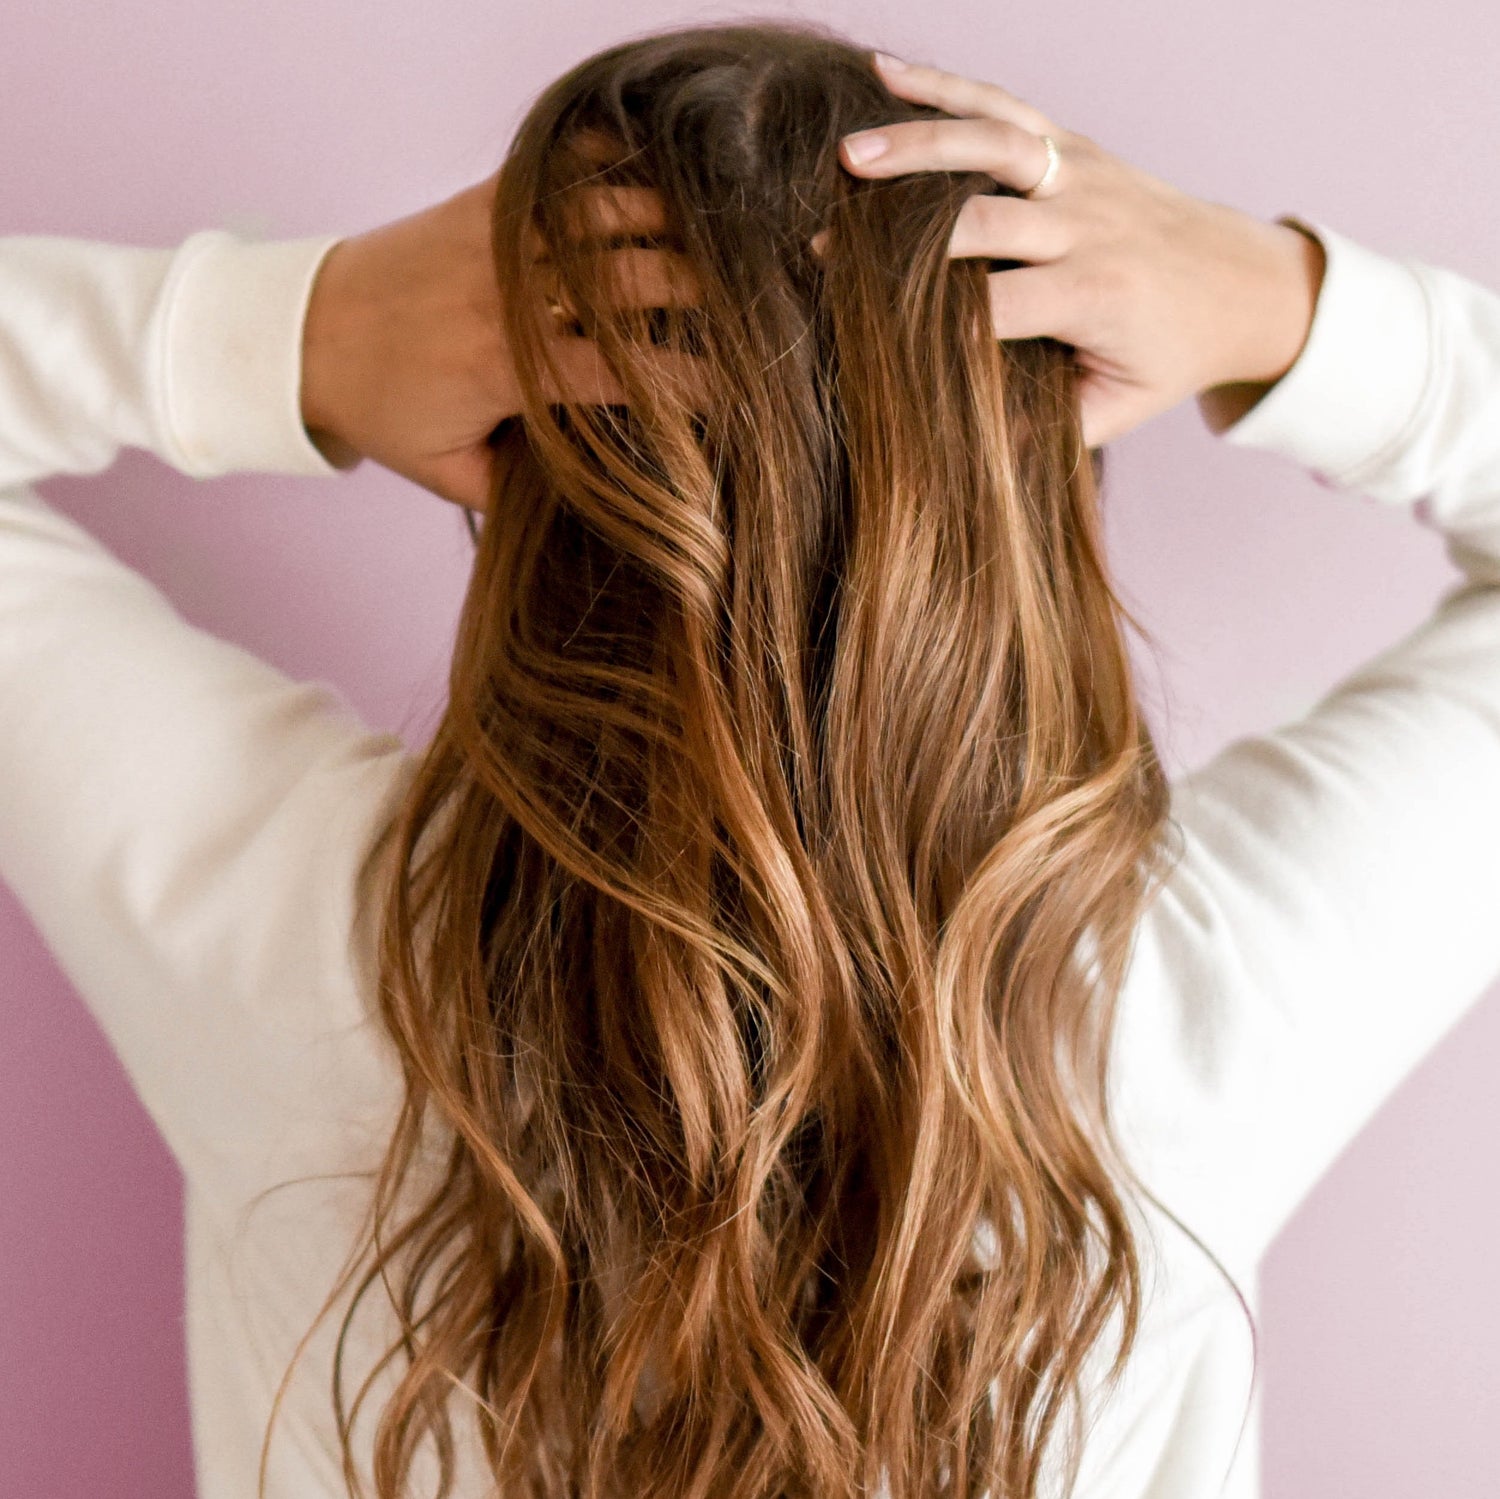 Ditch the Chemicals - The Best Natural Hair Dye Without Any Chemicals or  Toxins